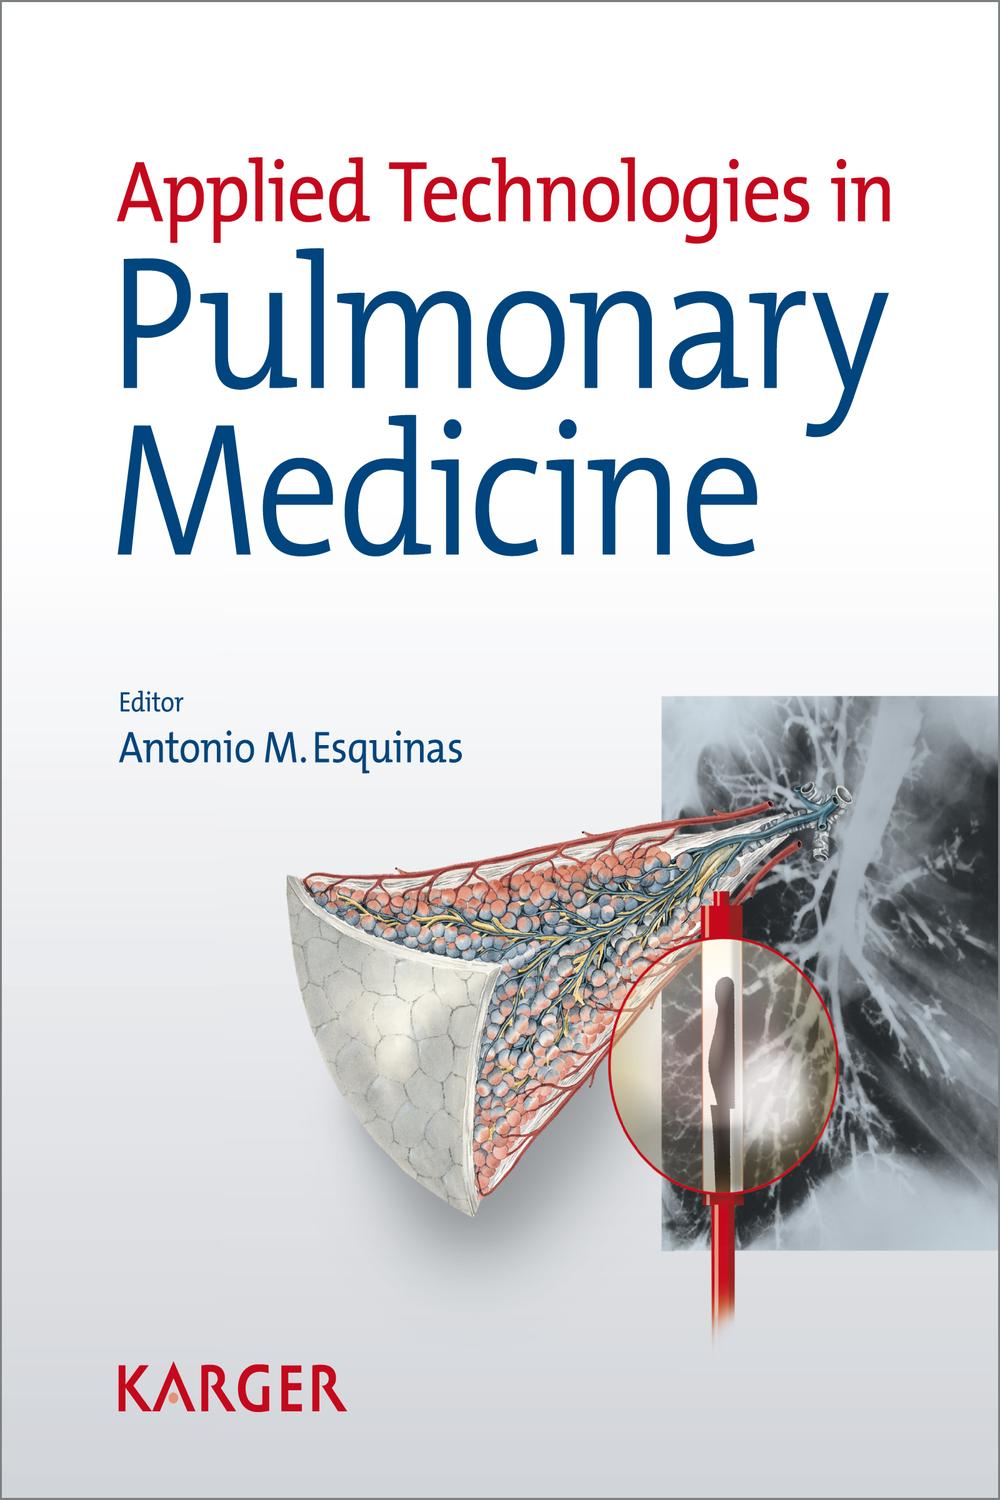 Applied Technologies in Pulmonary Medicine - A. M. Esquinas